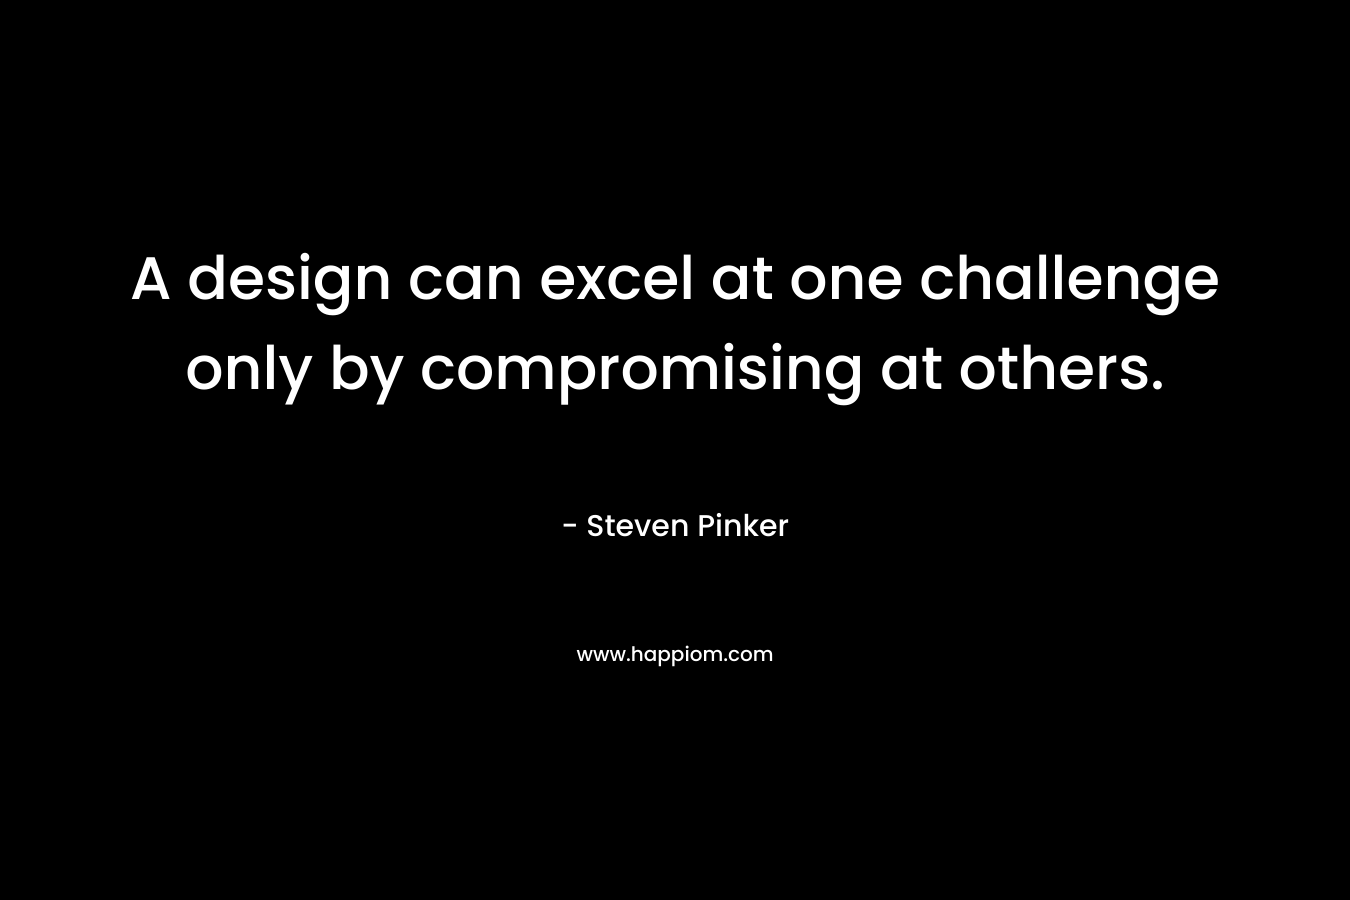 A design can excel at one challenge only by compromising at others. – Steven Pinker